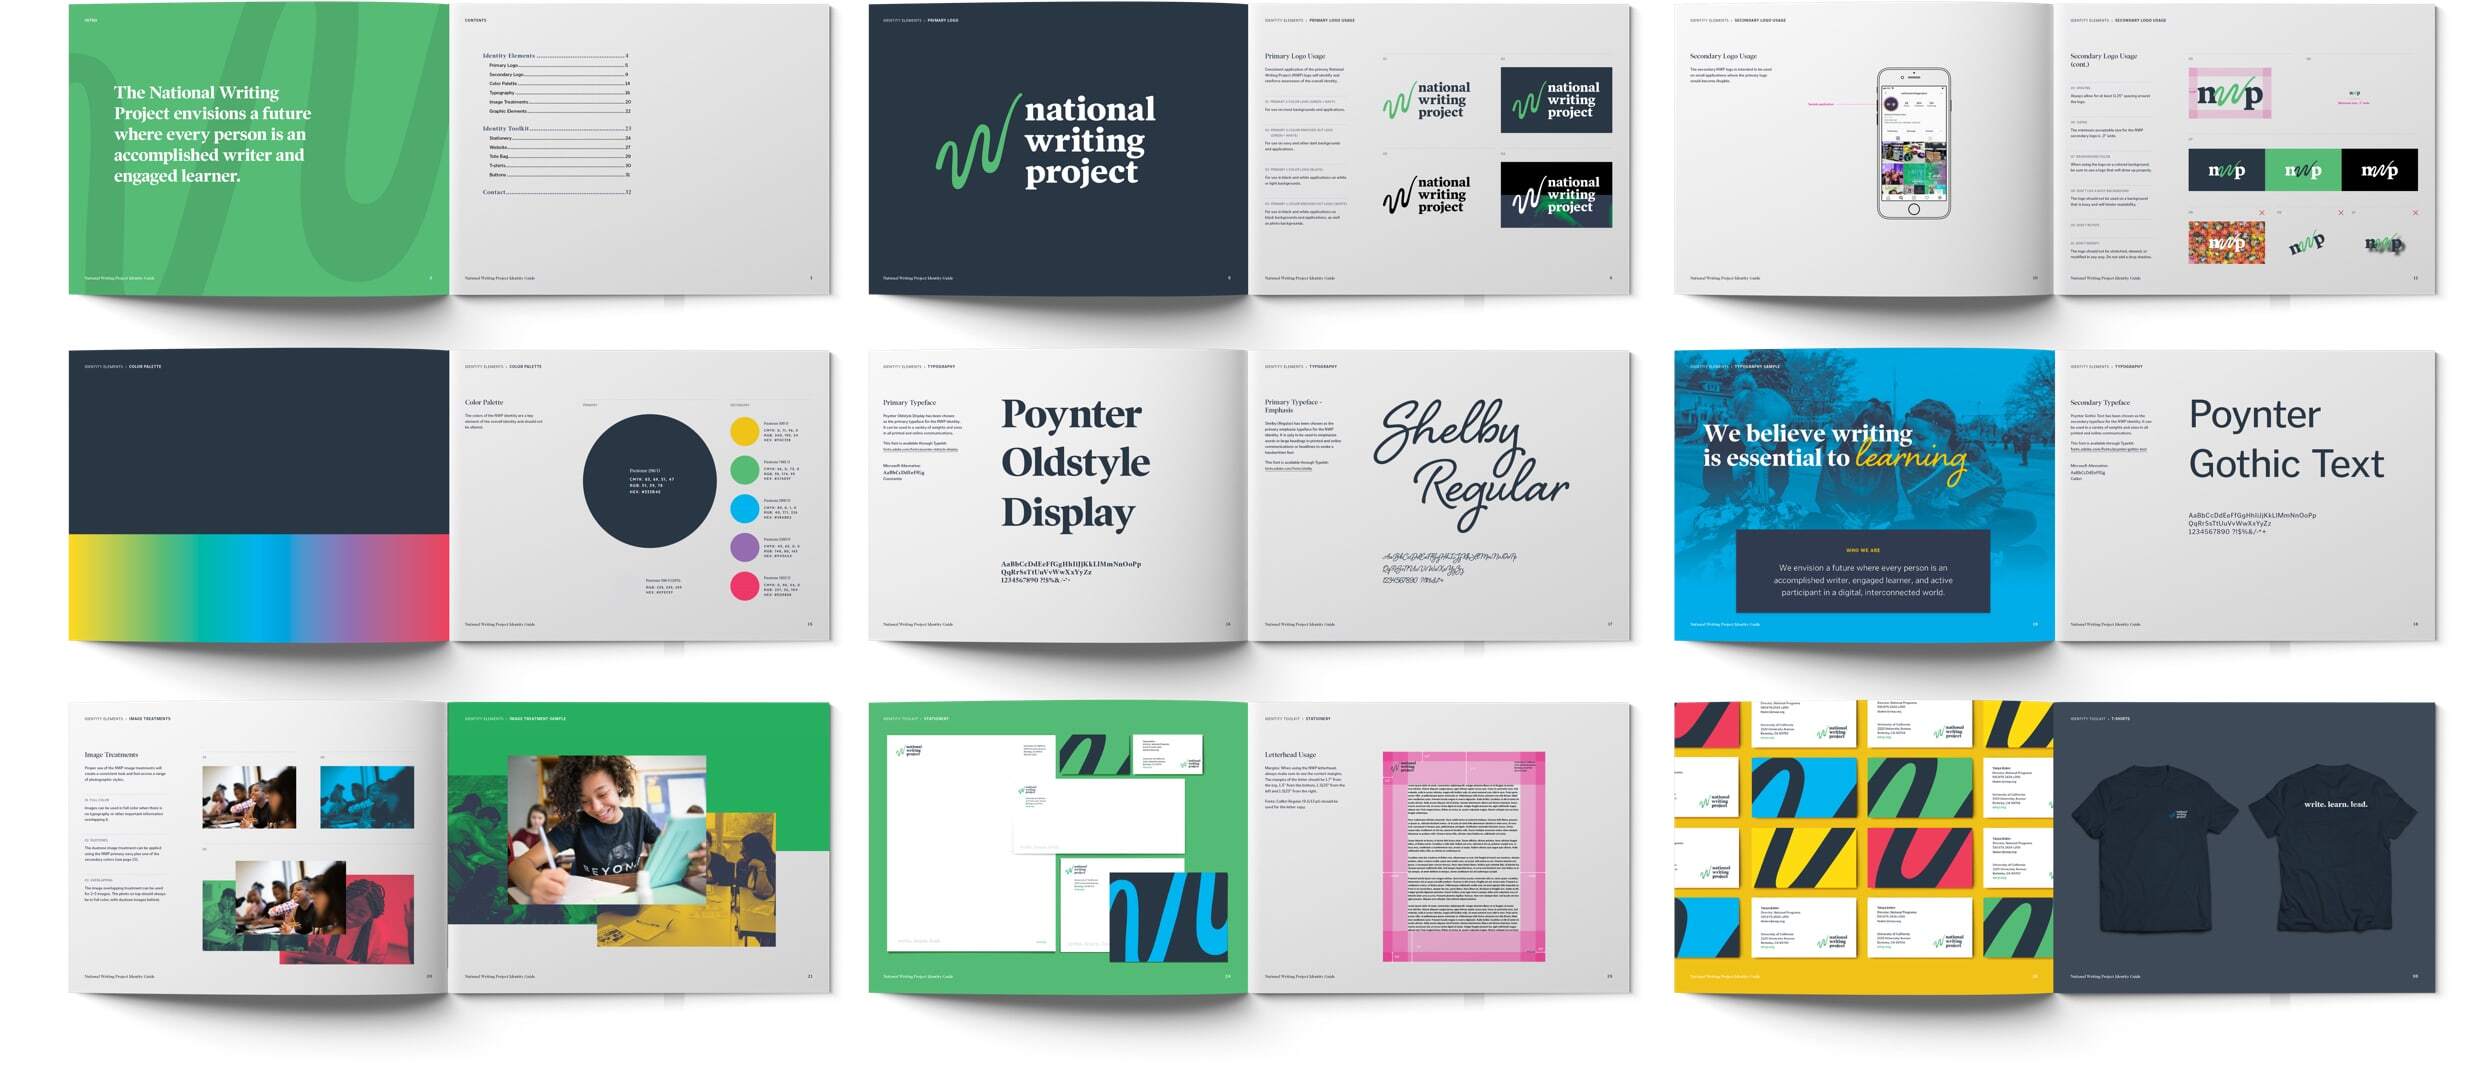 Nwp identity brand guide inline